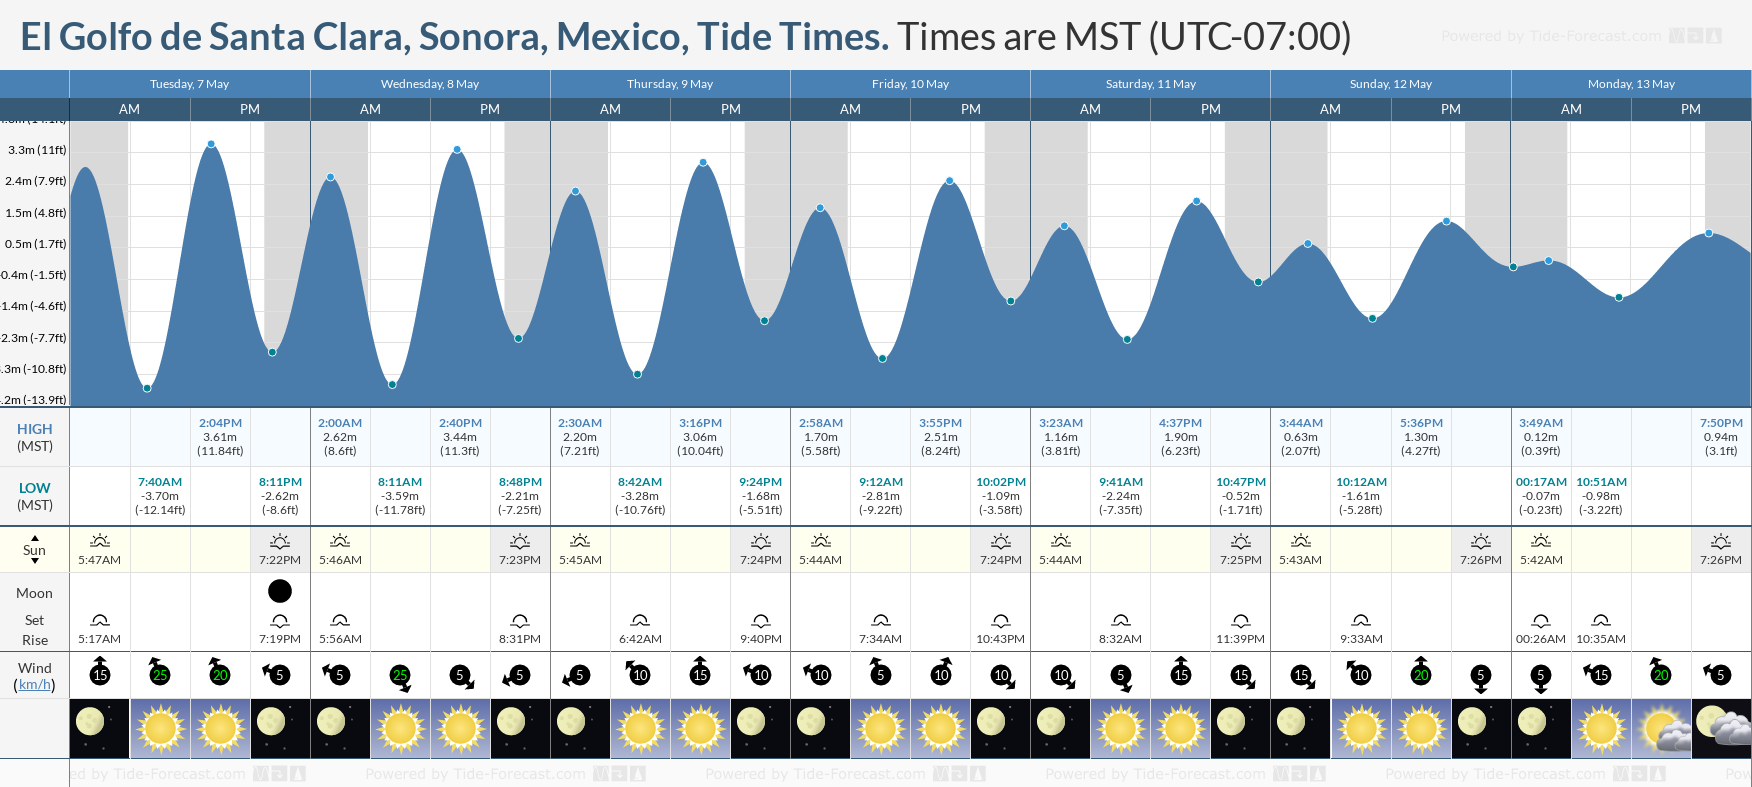 El Golfo de Santa Clara, Sonora, Mexico Tide Chart including high and low tide times for the next 7 days